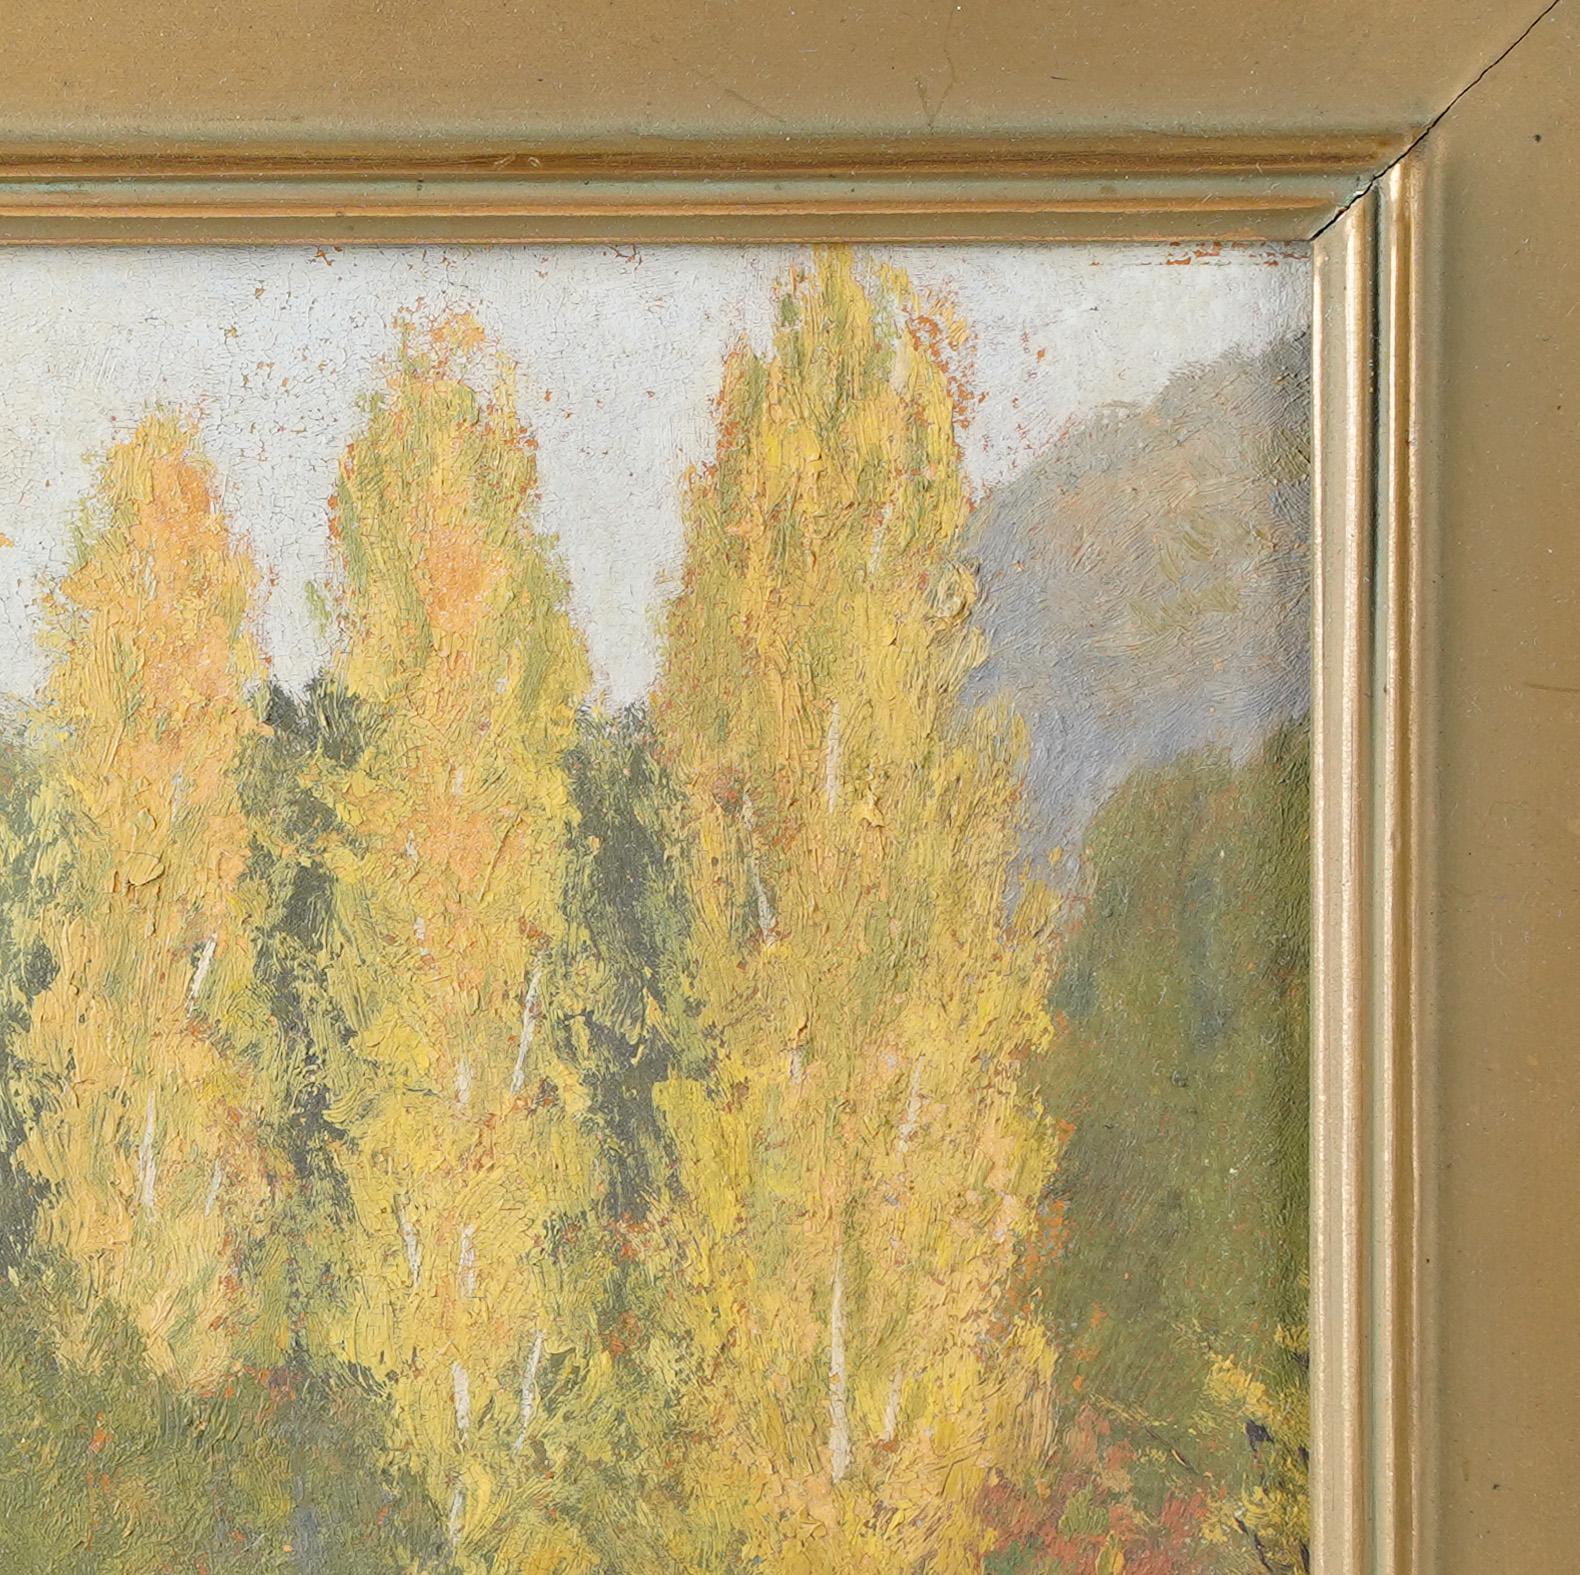 Antique American impressionist landscape painting. Oil on board.  Housed in a period frame.  Image size, 8L x 10H.  Signed.
